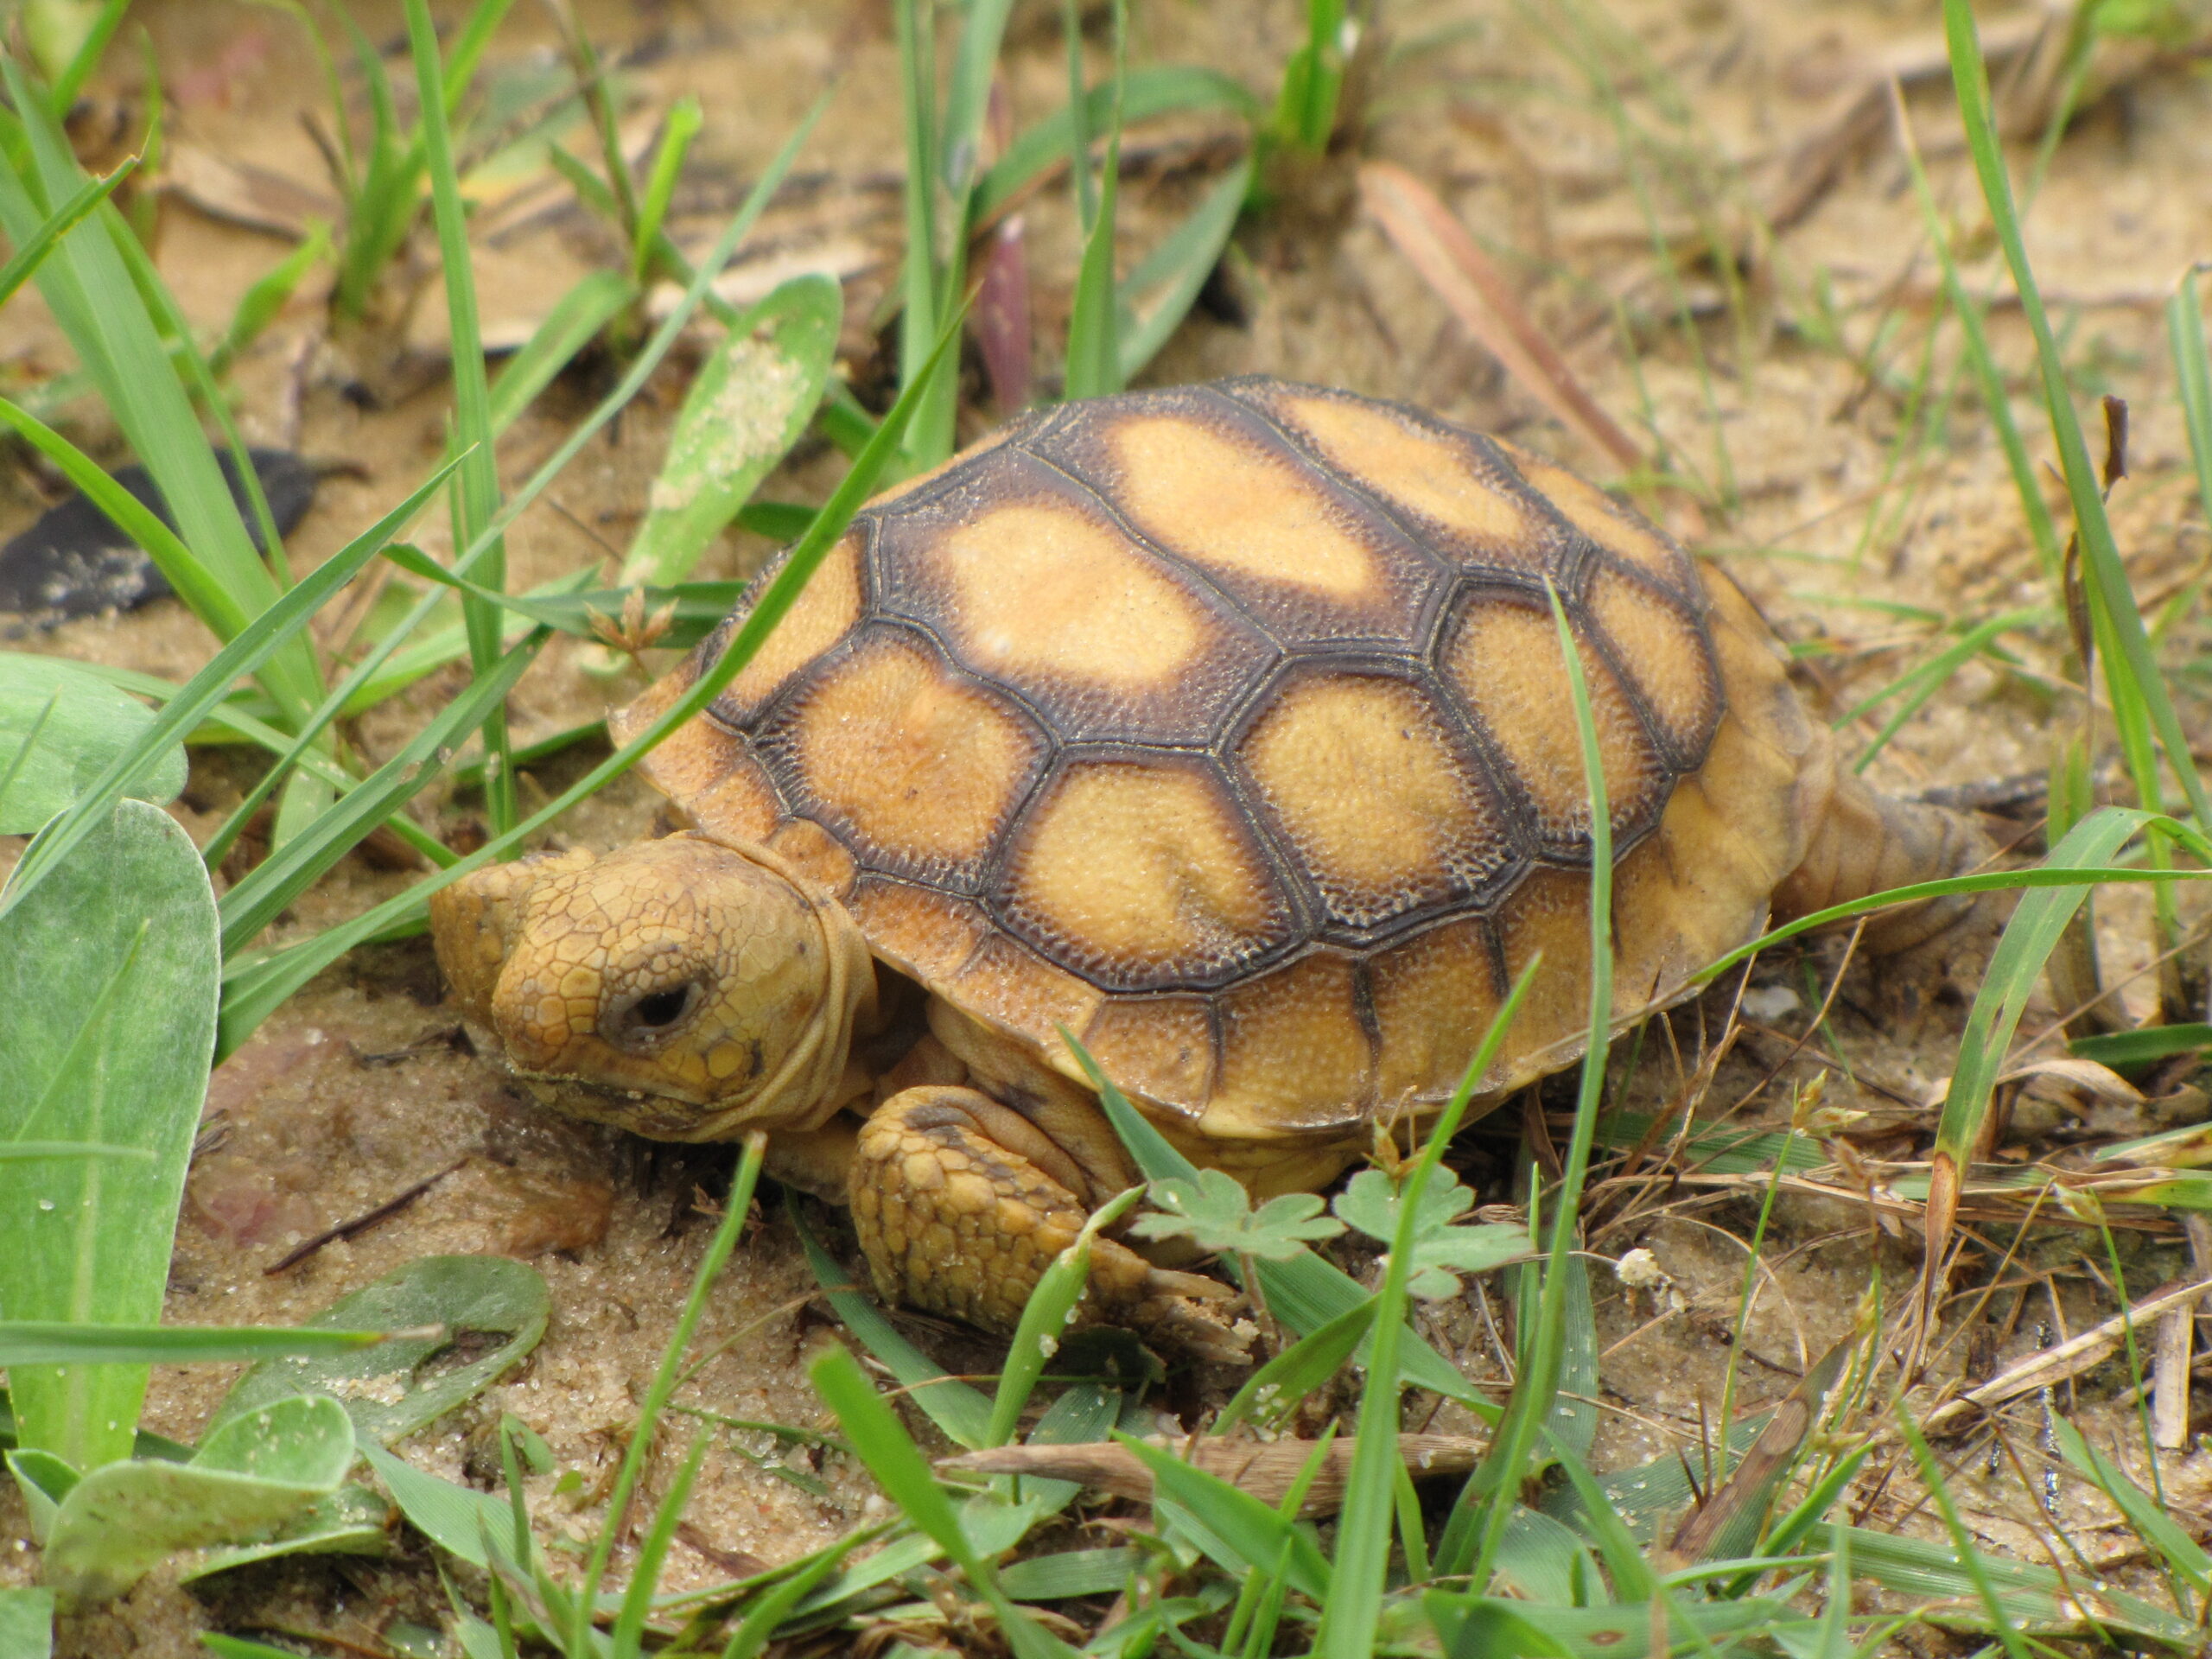 A tan and brown turtle rests on the ground.